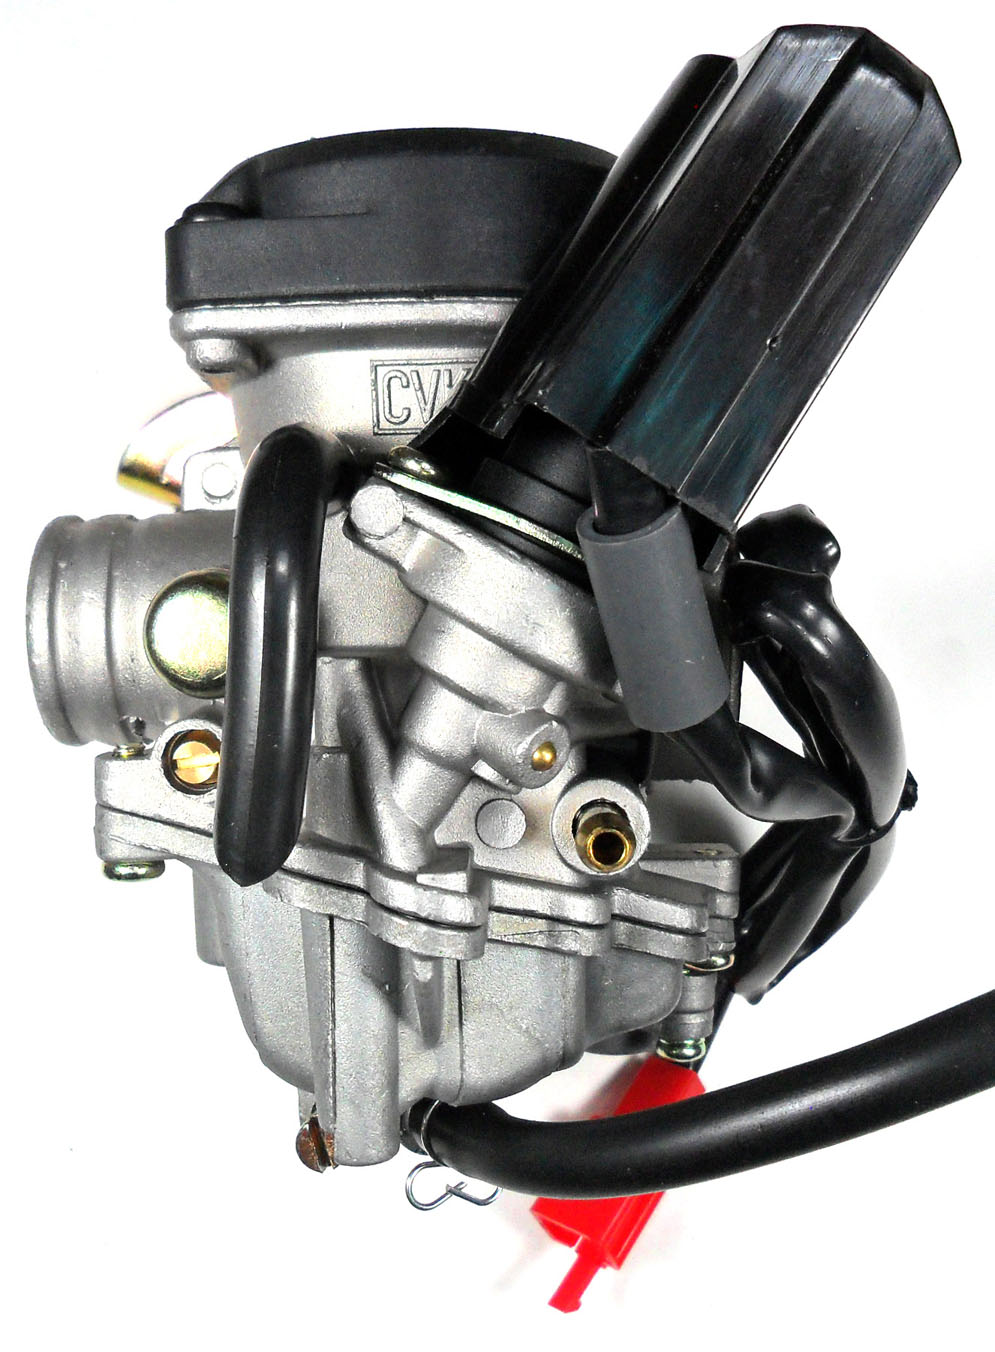 Runtong CVK PD18J Carburetor with booster pump Intake ID=18 OD=28 Air Box OD=39mm Fits Most 49-80cc GY6 Belt Driven Scooters - Click Image to Close